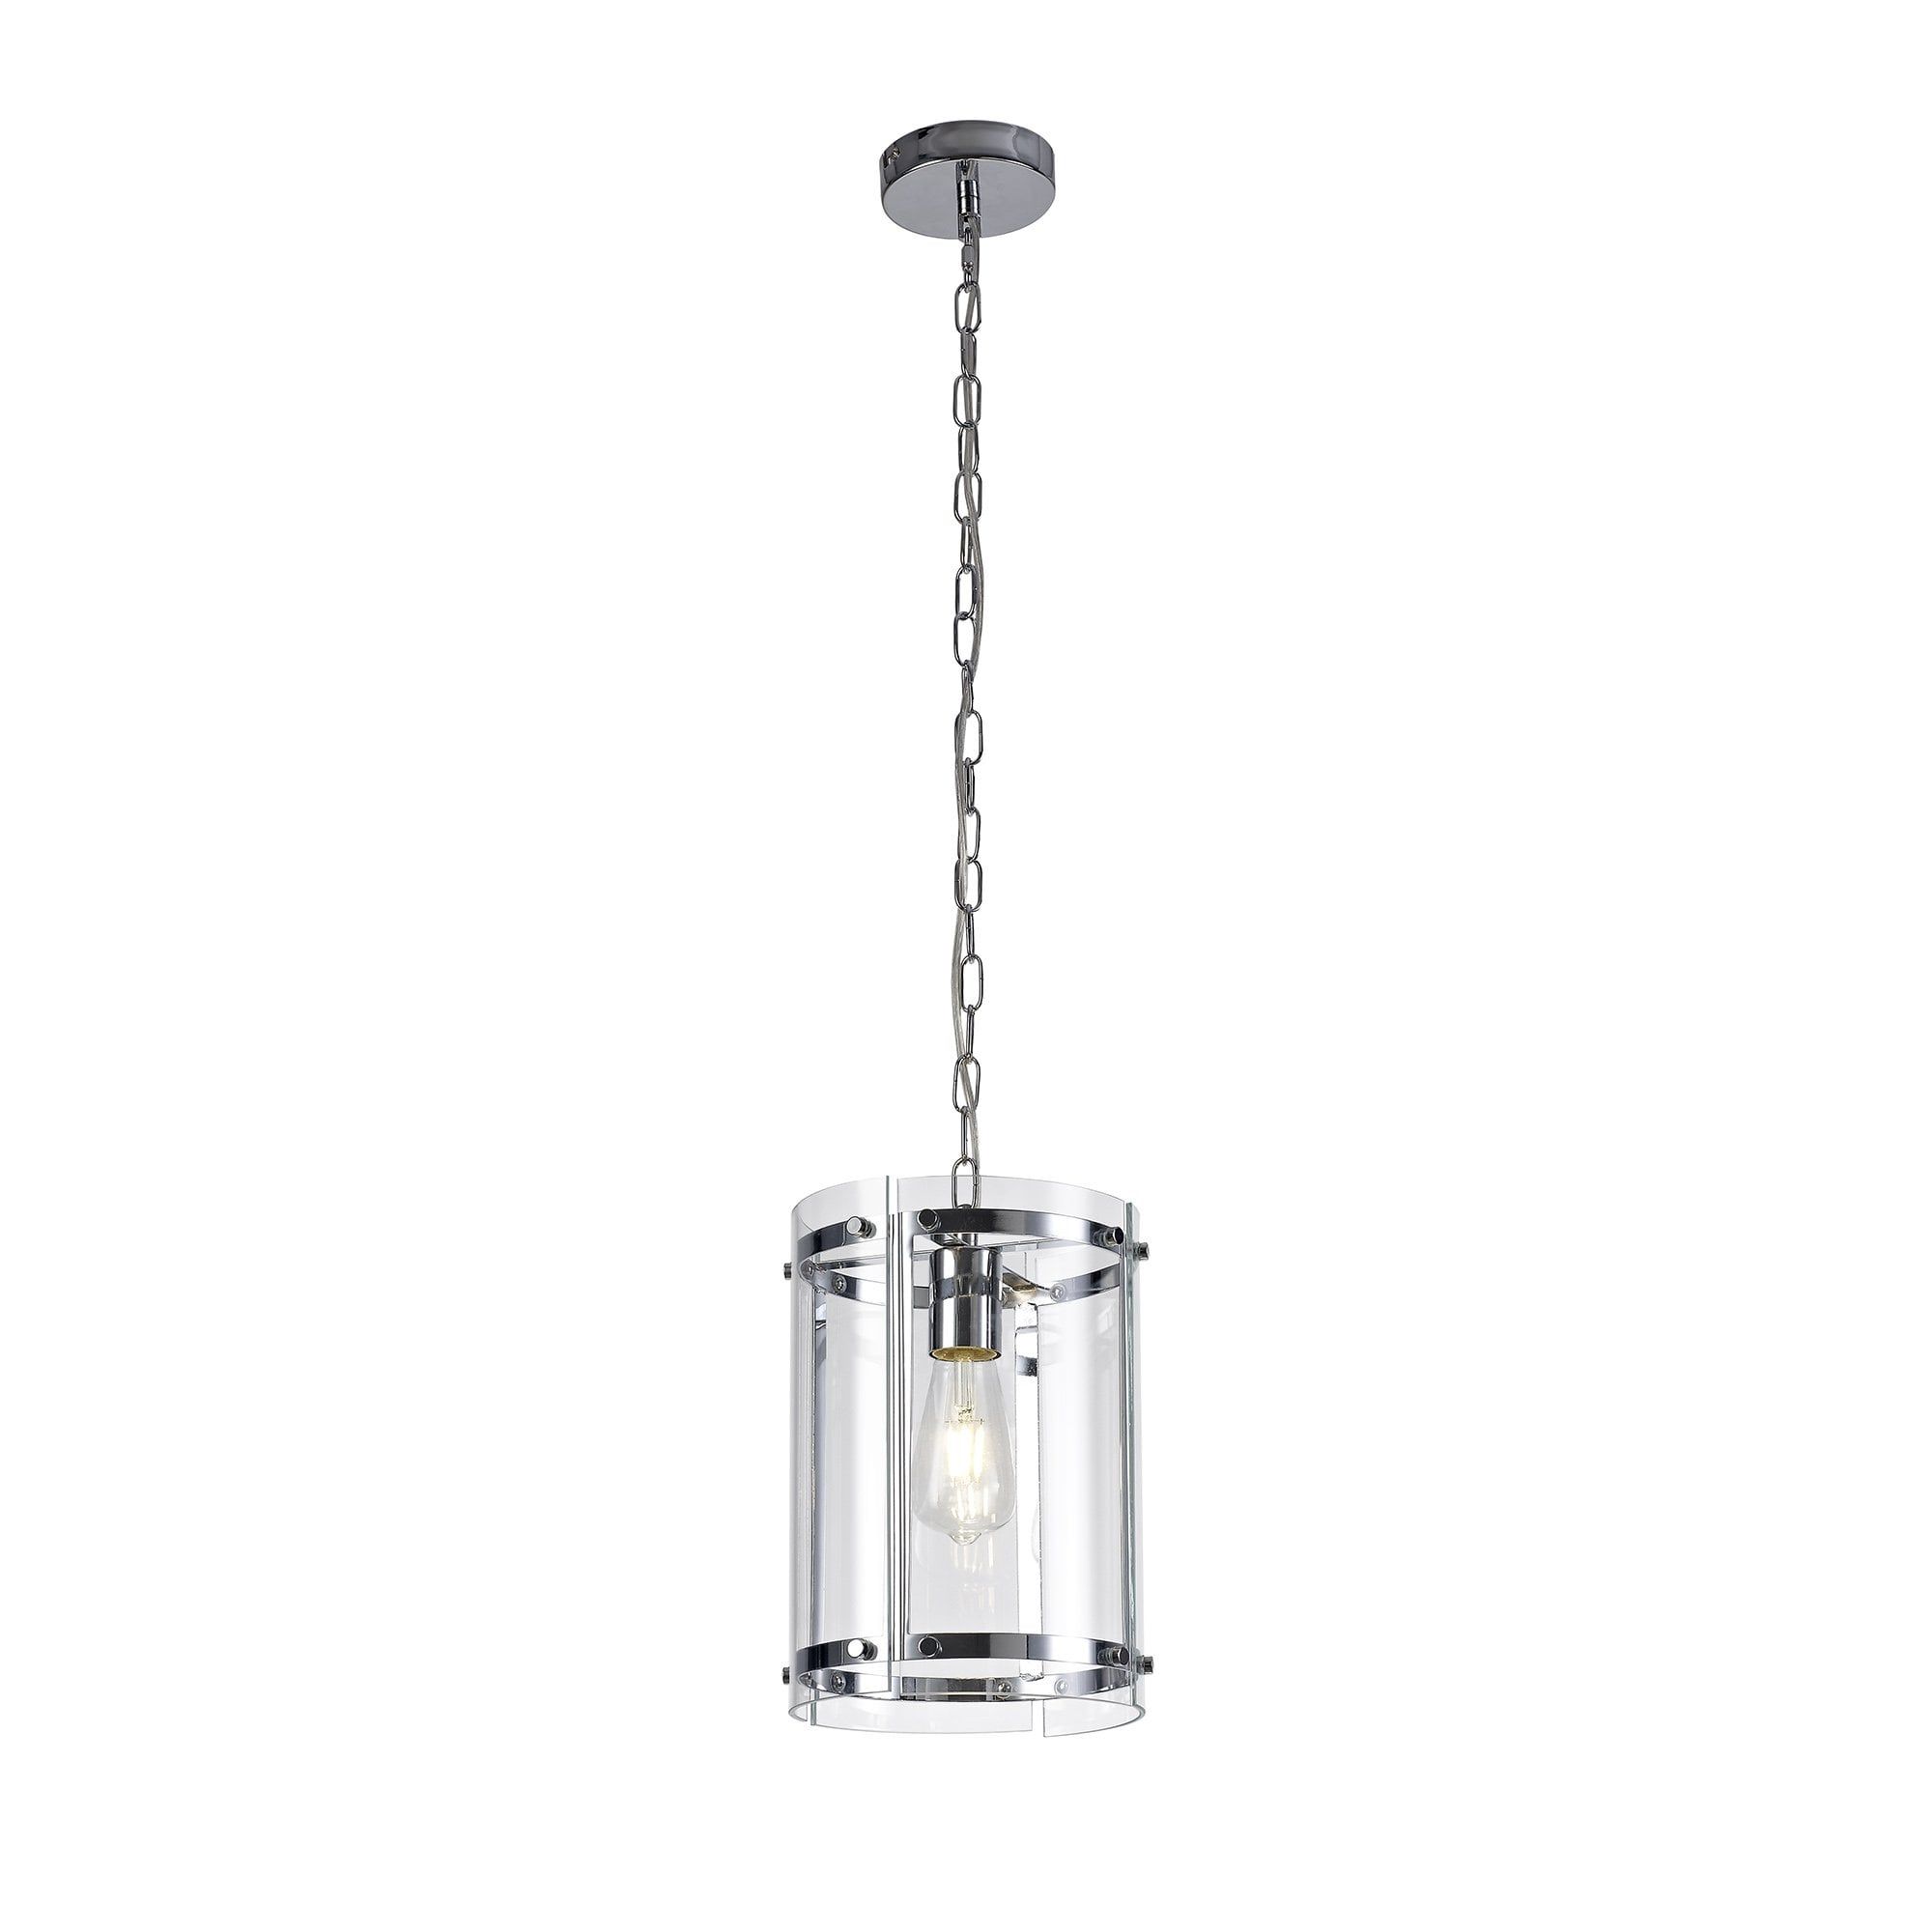 Popular Ceiling Pendant Lantern In Polished Chrome With Glass Panels Throughout Chrome Lantern Chandeliers (View 5 of 15)